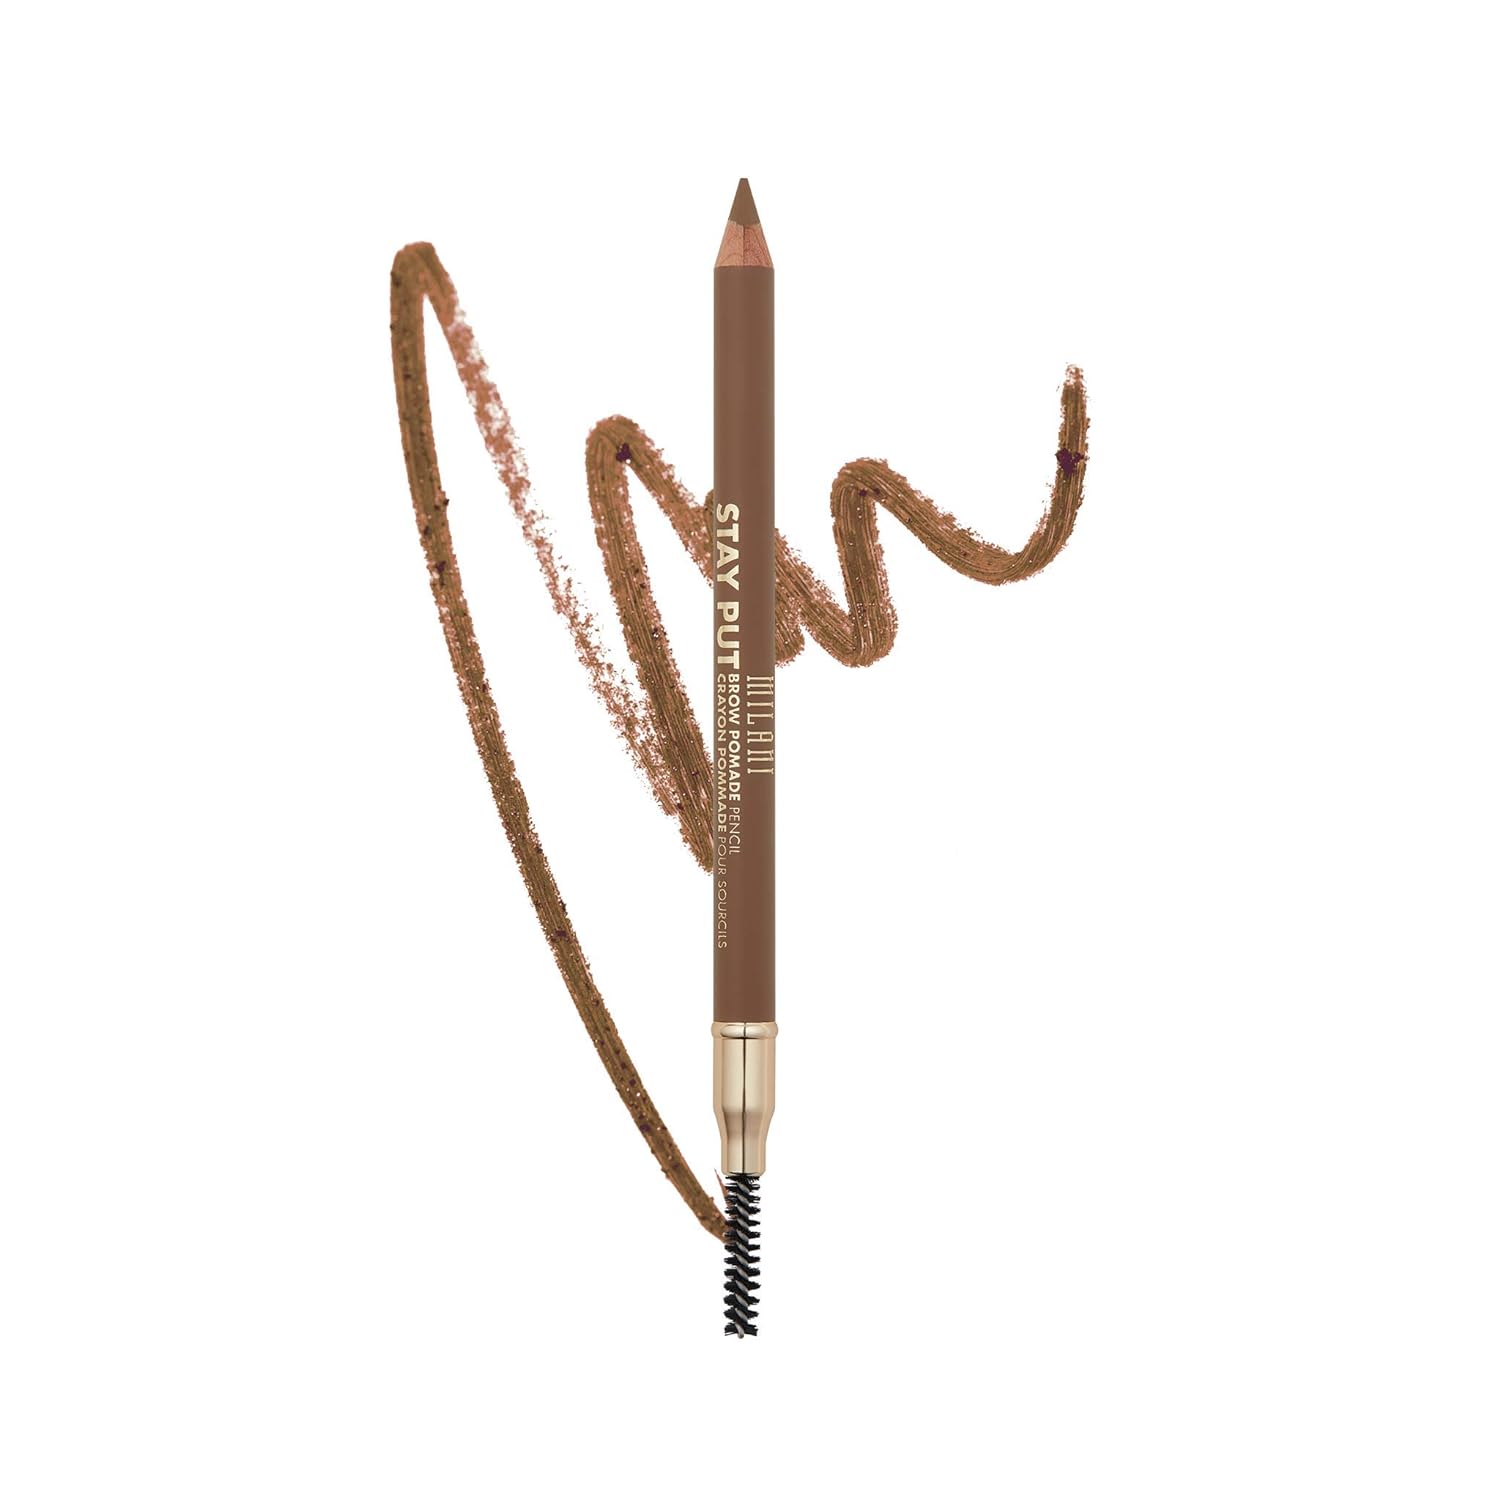 Milani Stay Put Brow Pomade Pencil - Soft Brown (0.03 ) Vegan, Cruelty-Free Eyebrow Pencil to Fill, Shape & Define Brows